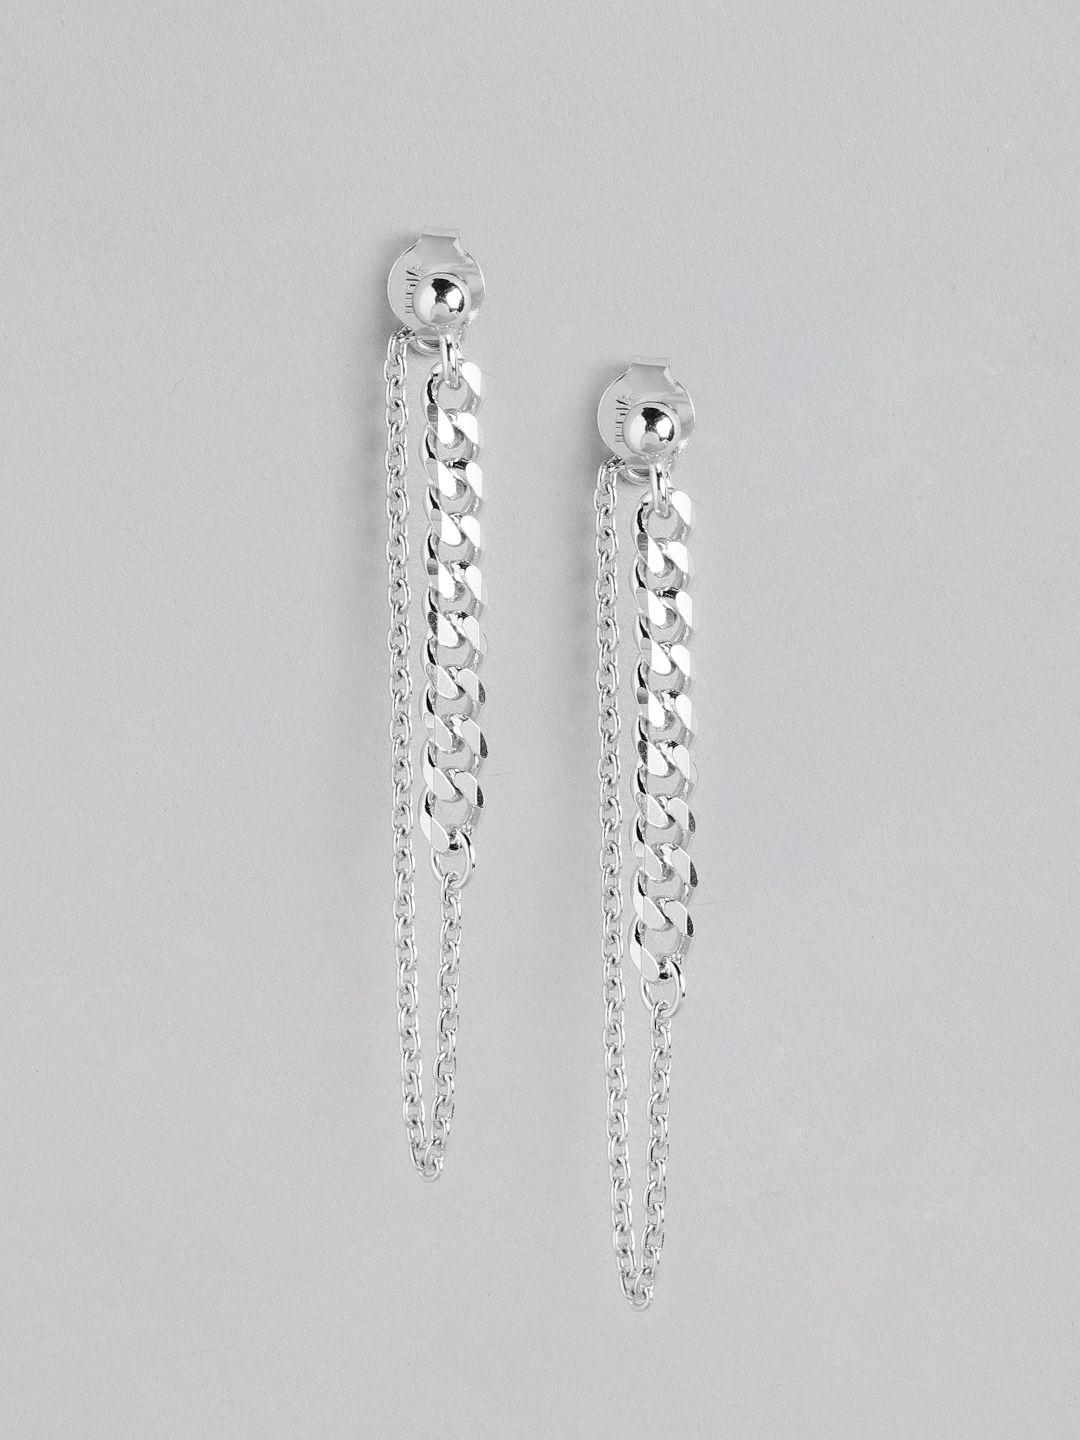 carlton london rhodium-plated 925 sterling silver contemporary drop earrings